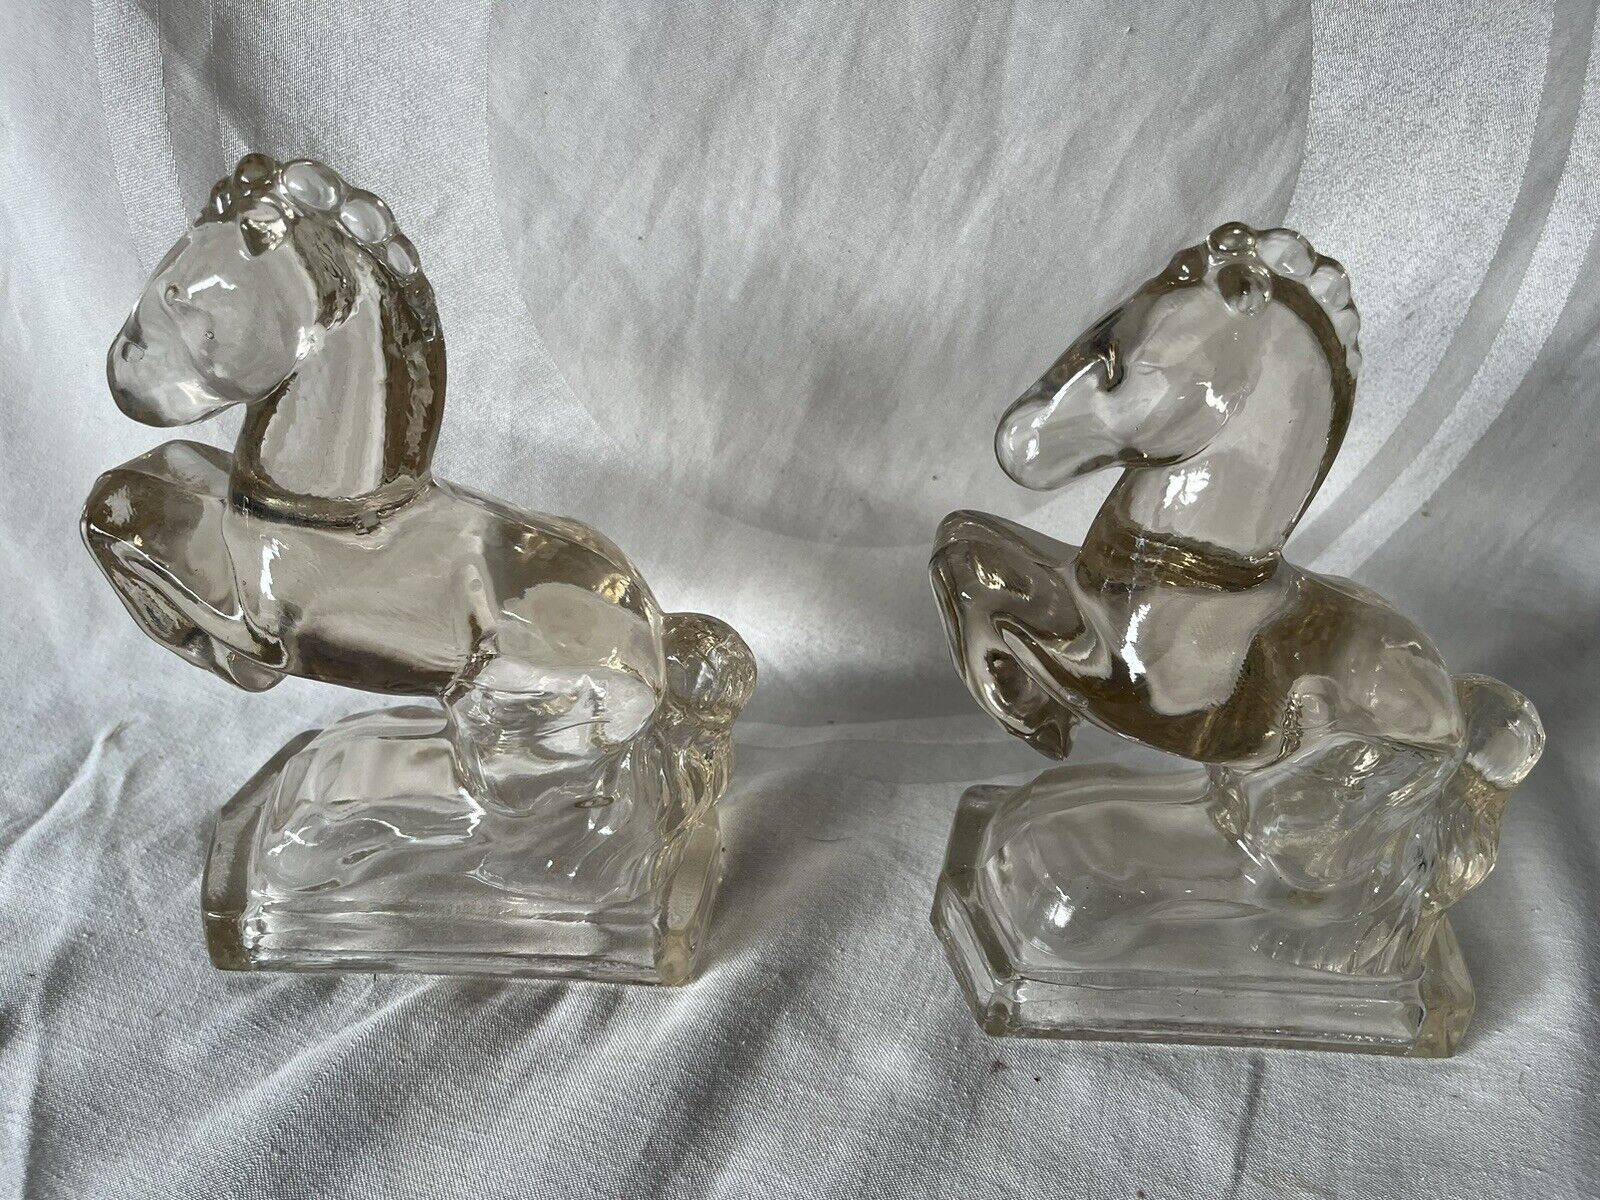 Vintage Clear Glass Rearing Horses Book Ends - 8 Inches Tall